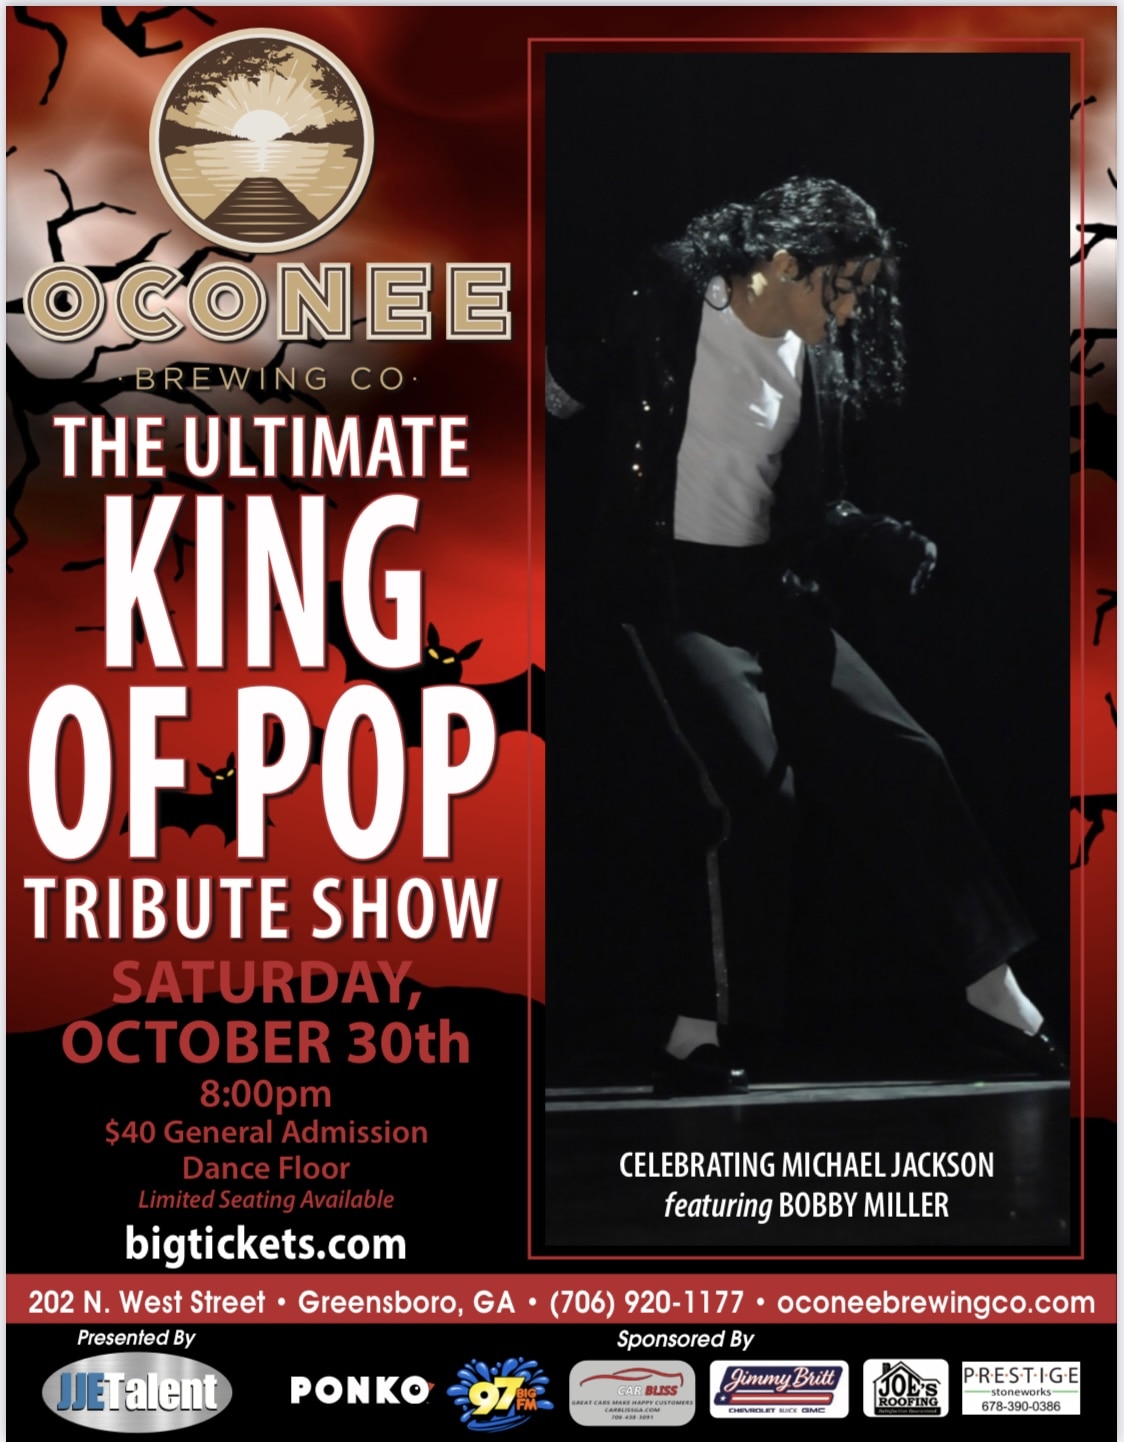 King of Pop tribute show flyer